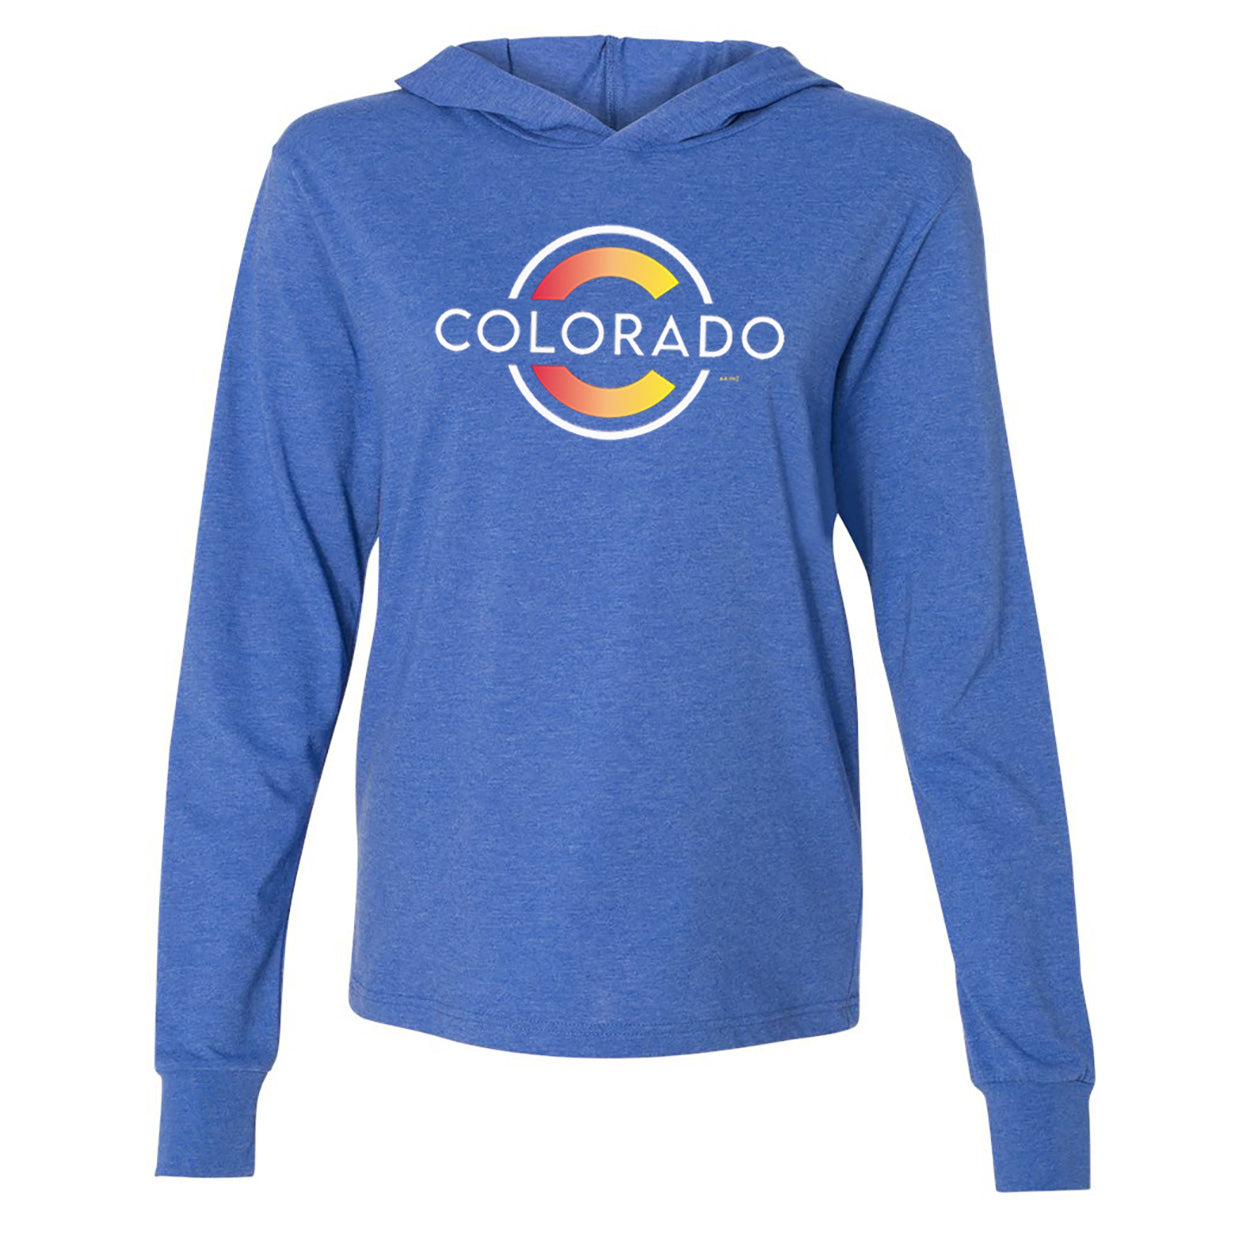 classic-colorado-hooded-pullover.jpg